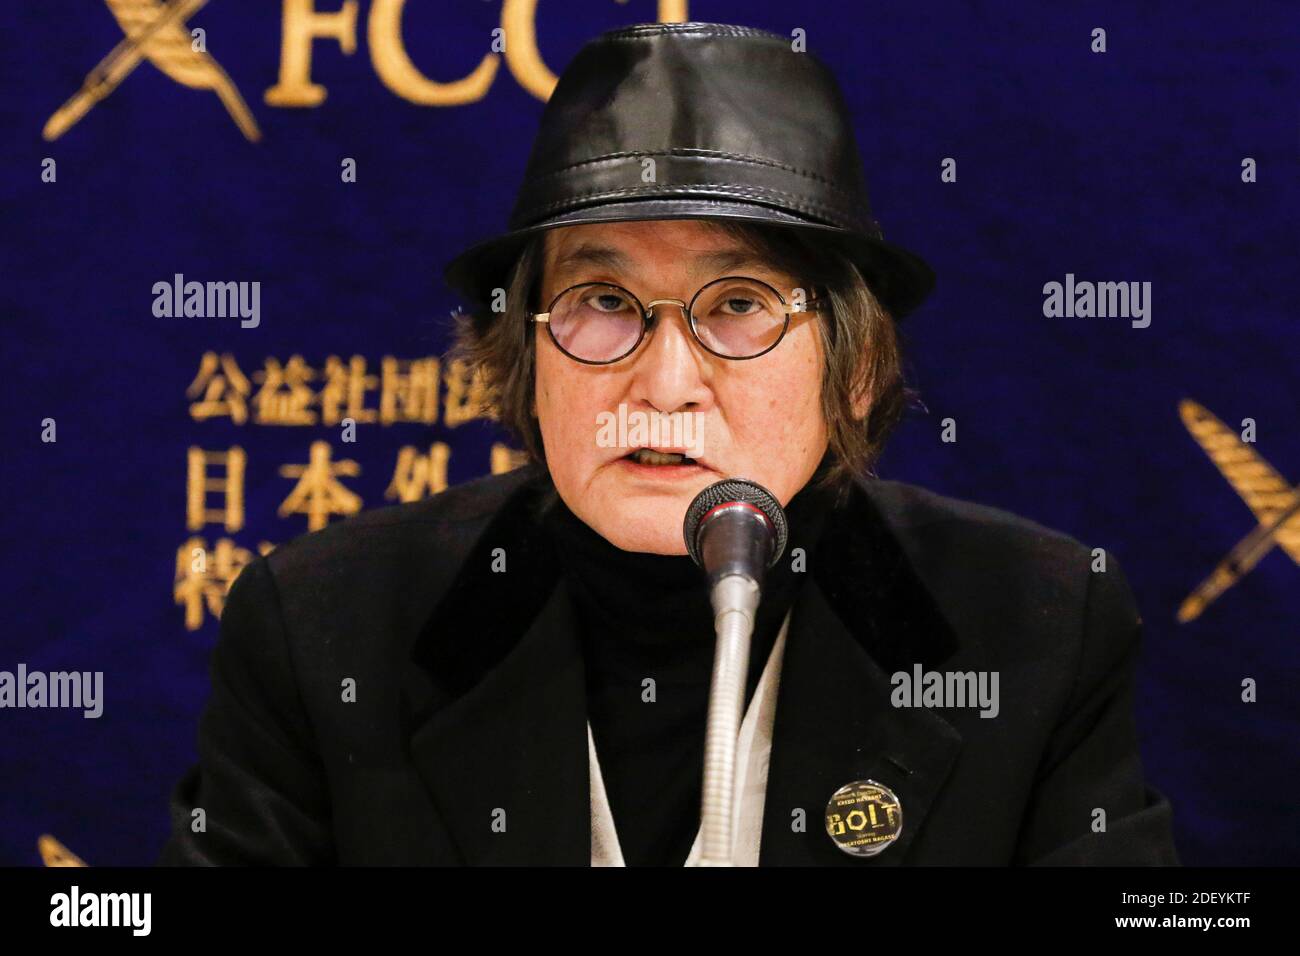 Tokyo, Japan. 2nd Dec 2020. Japanese director Kaizo Hayashi speaks during a Q&A session for the film BOLT at The Foreign Correspondents' Club of Japan on December 2, 2020, Tokyo, Japan. Director Hayashi and actor Shiro Sano answered questions from journalists after the screening of the Japanese film. BOLT is based on a true story during the 3/11 disasters at the Fukushima Daiichi Nuclear Power Plant. The film will be released in Japan on February 11. Credit: Rodrigo Reyes Marin/AFLO/Alamy Live News Stock Photo